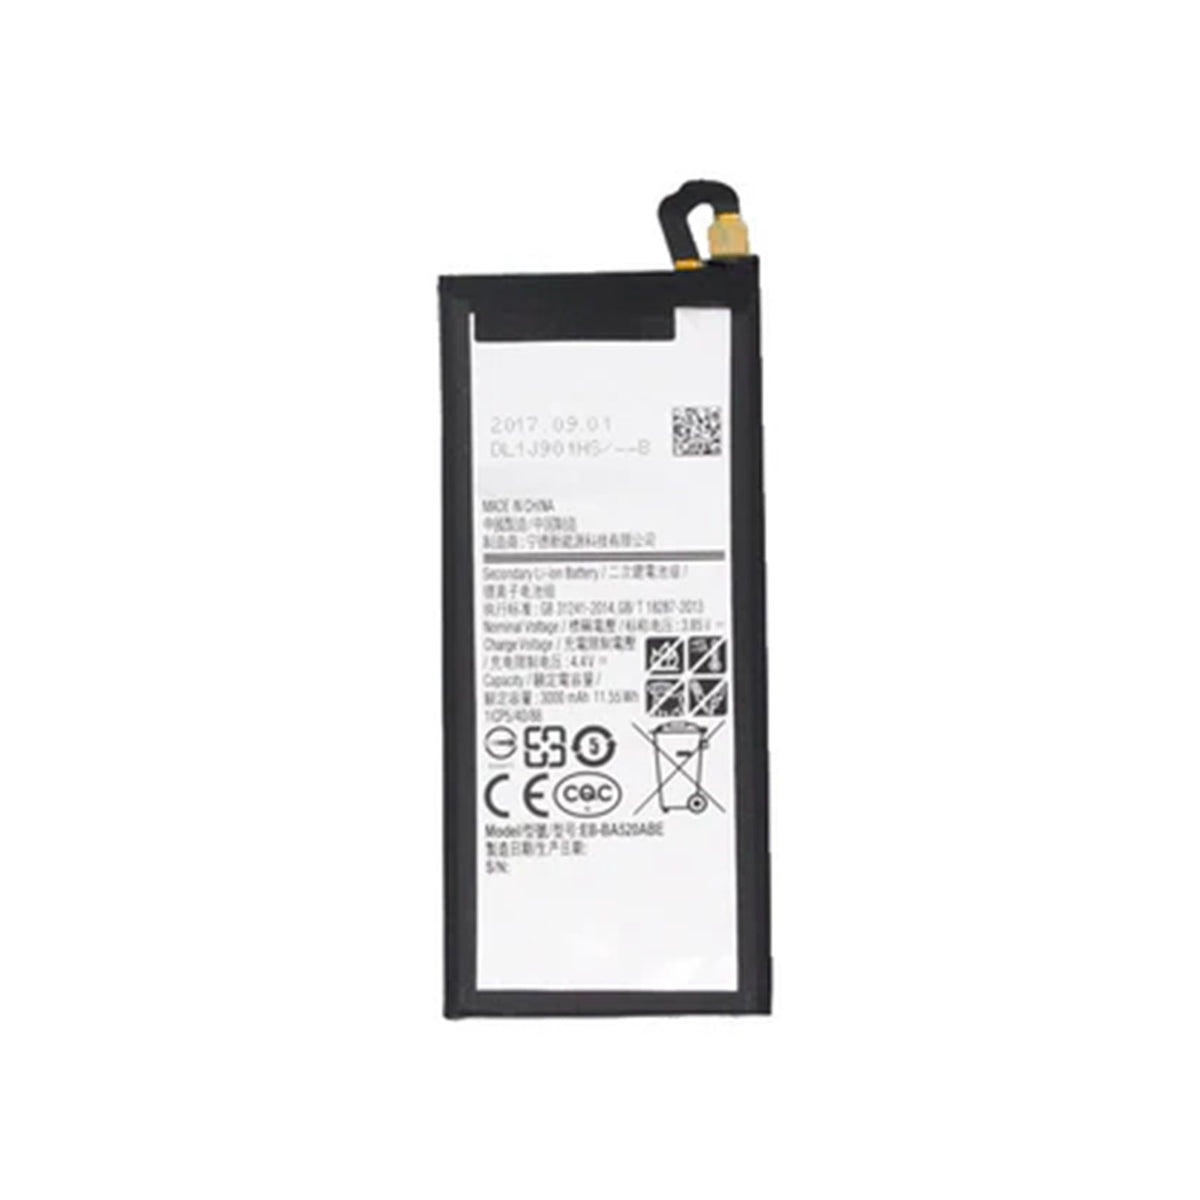 MOBILE BATTERY FOR SAMSUNG GALAXY A5 2017 - A520